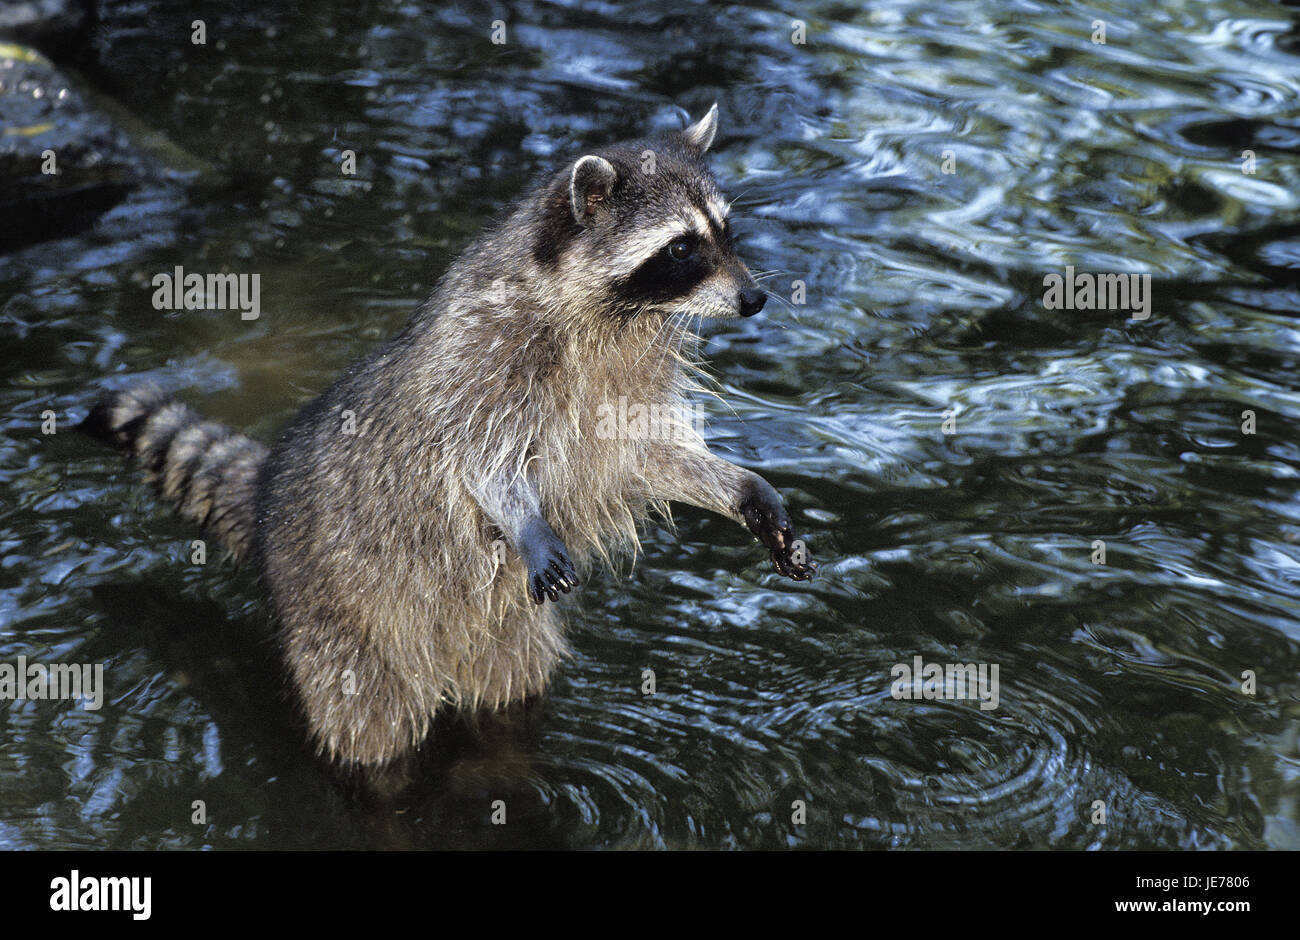 Racoon, Procyon lotor, also North American racoon, adult animal, stand, water, hind legs, Stock Photo